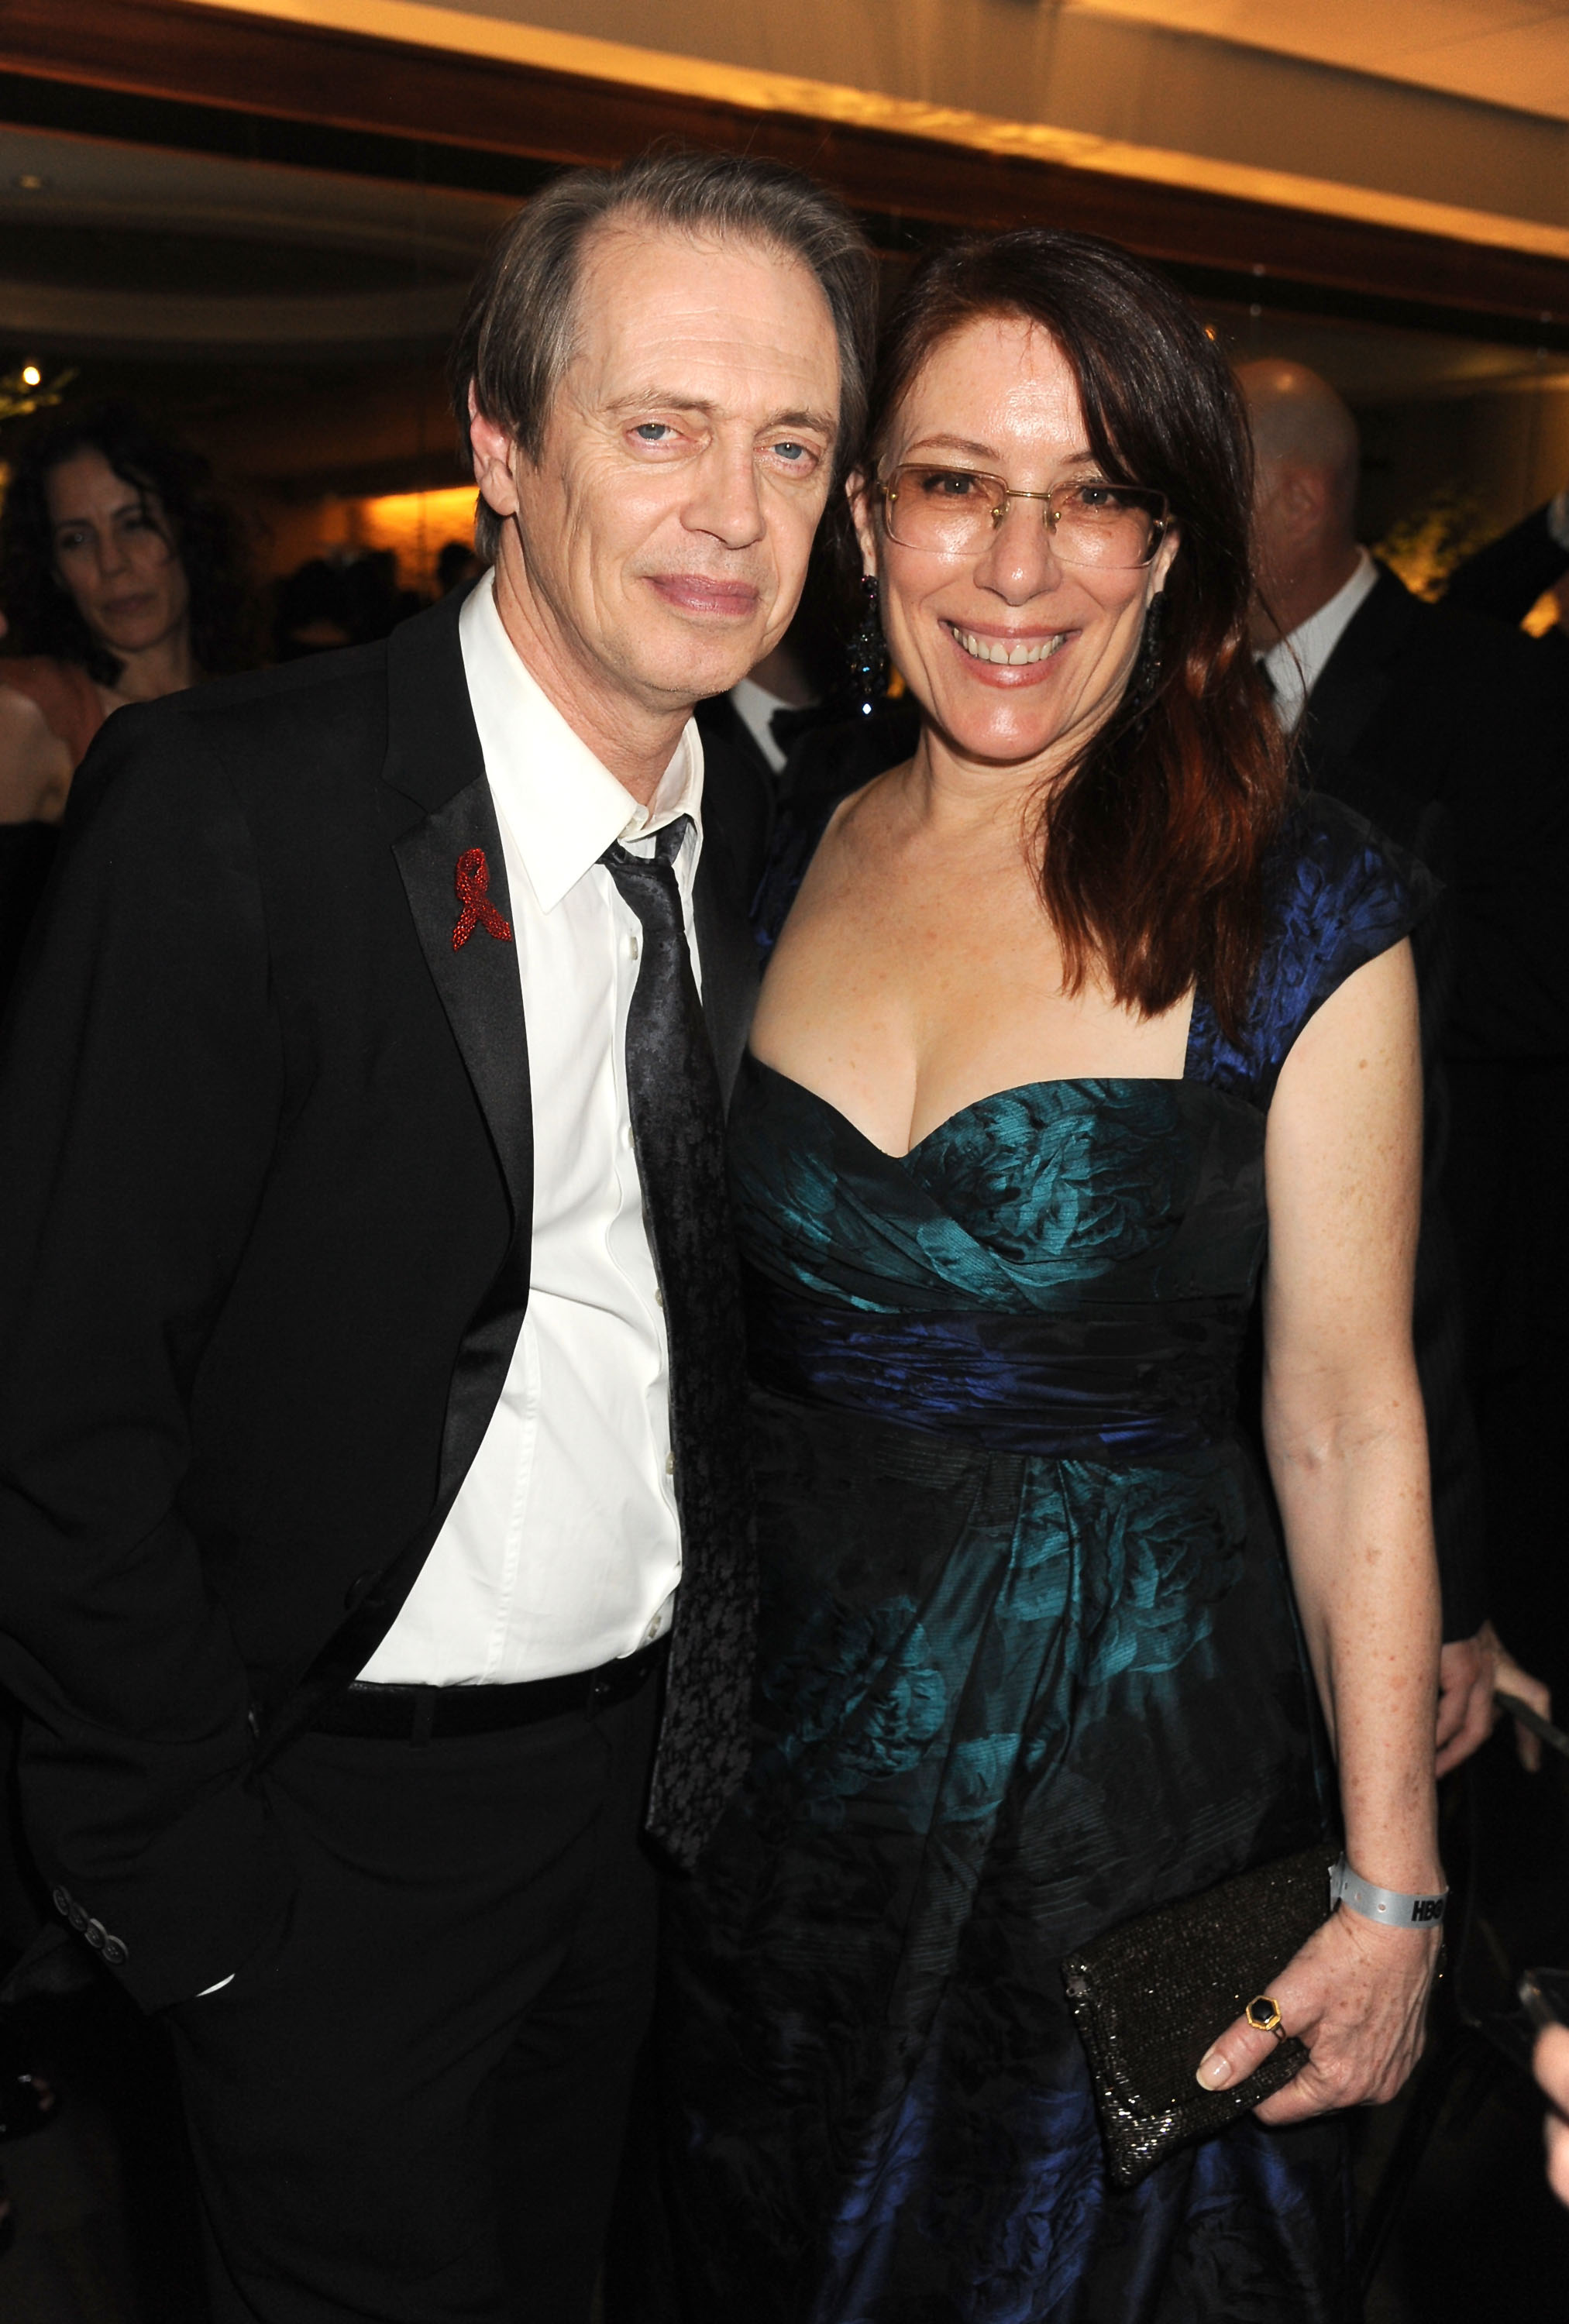 Steve Buscemi and Jo Andres attend the 69th Annual Golden Globe Awards after party in Beverly Hills, California on January 15, 2012 | Source: Getty Images